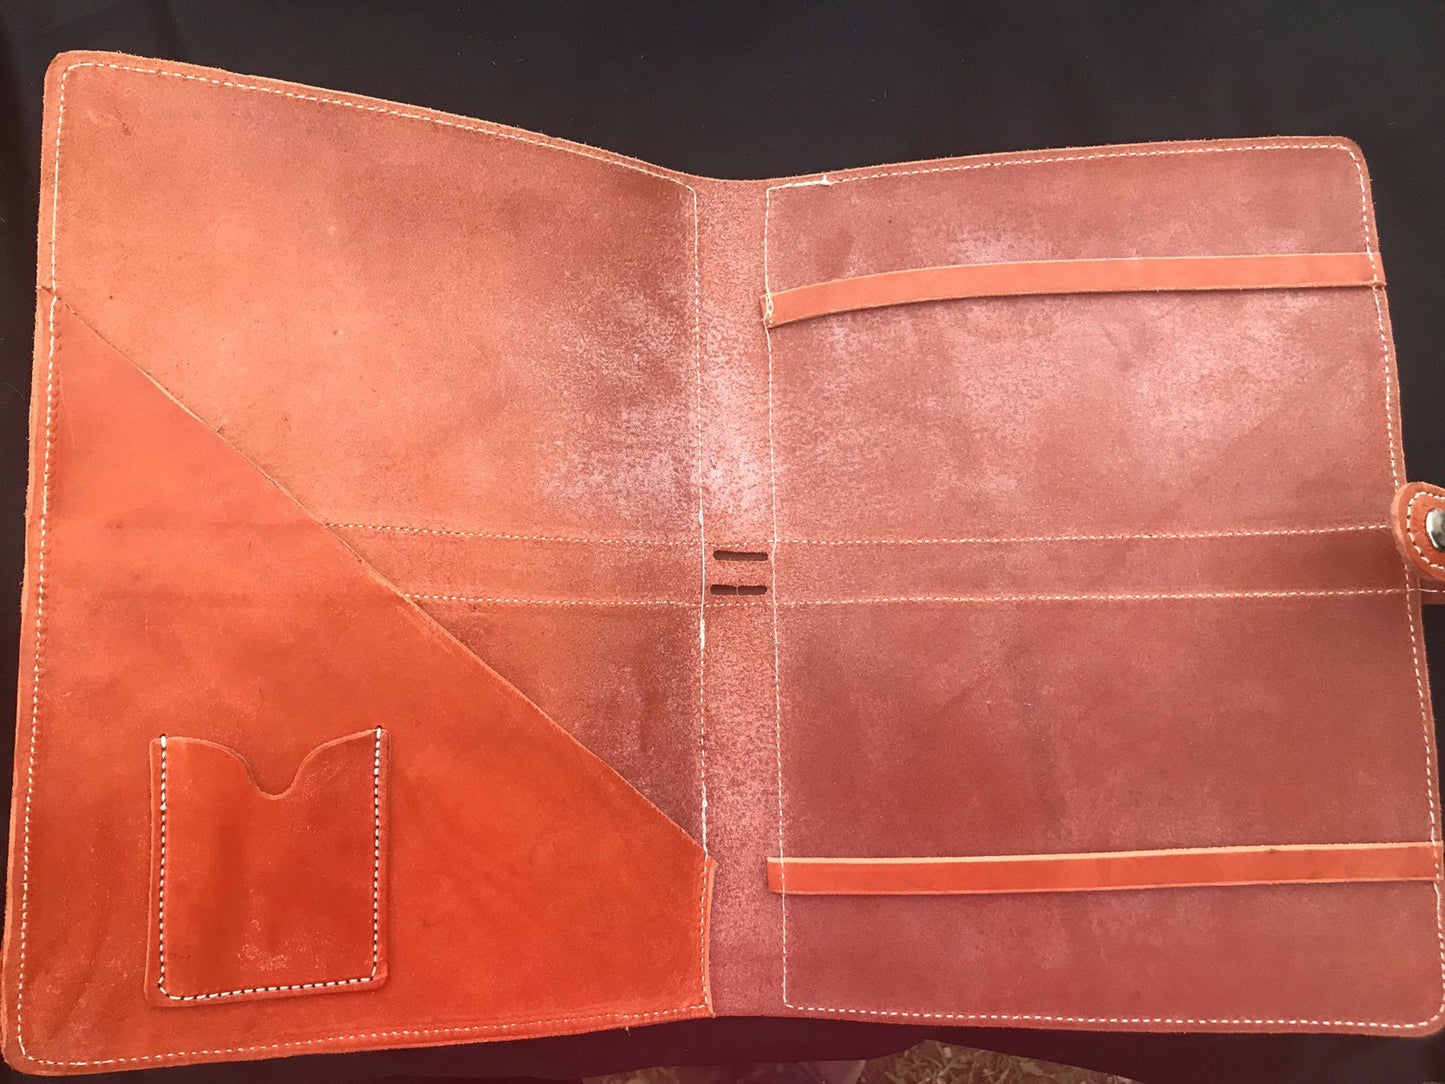 Handmade Leather ipad or tablet Journal Cover with Legal Pad, Portfolio, Leather Notepad, Legal Pad cover,